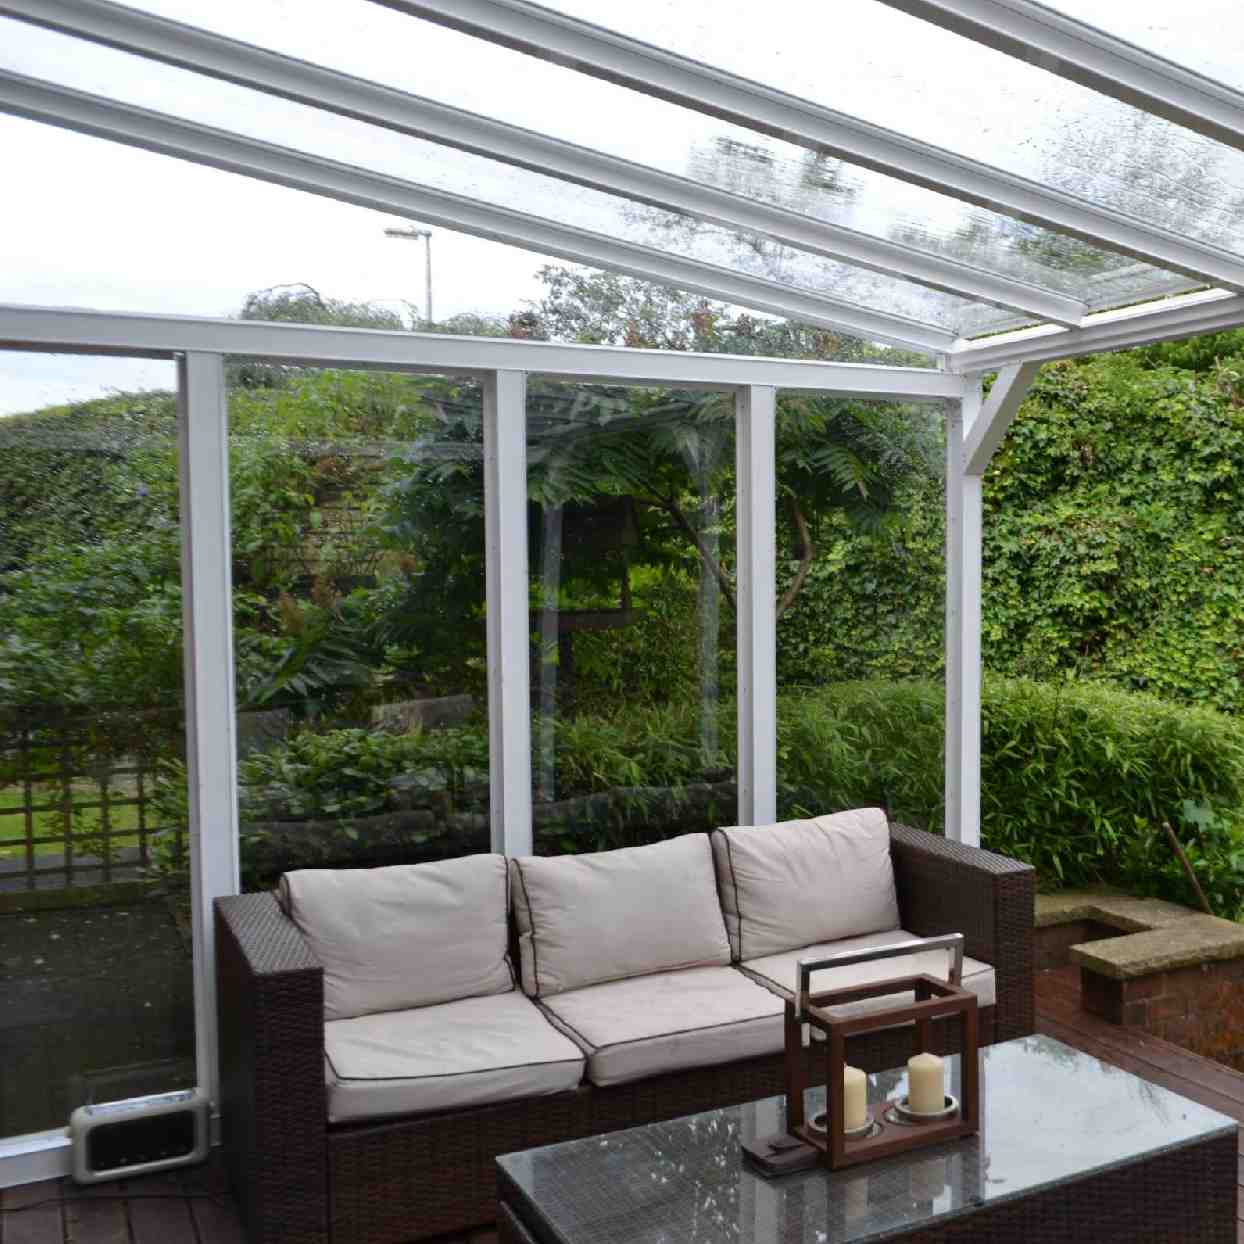 Buy Omega Verandah White with 6mm Glass Clear Plate Polycarbonate Glazing - 7.7m (W) x 2.5m (P), (4) Supporting Posts online today